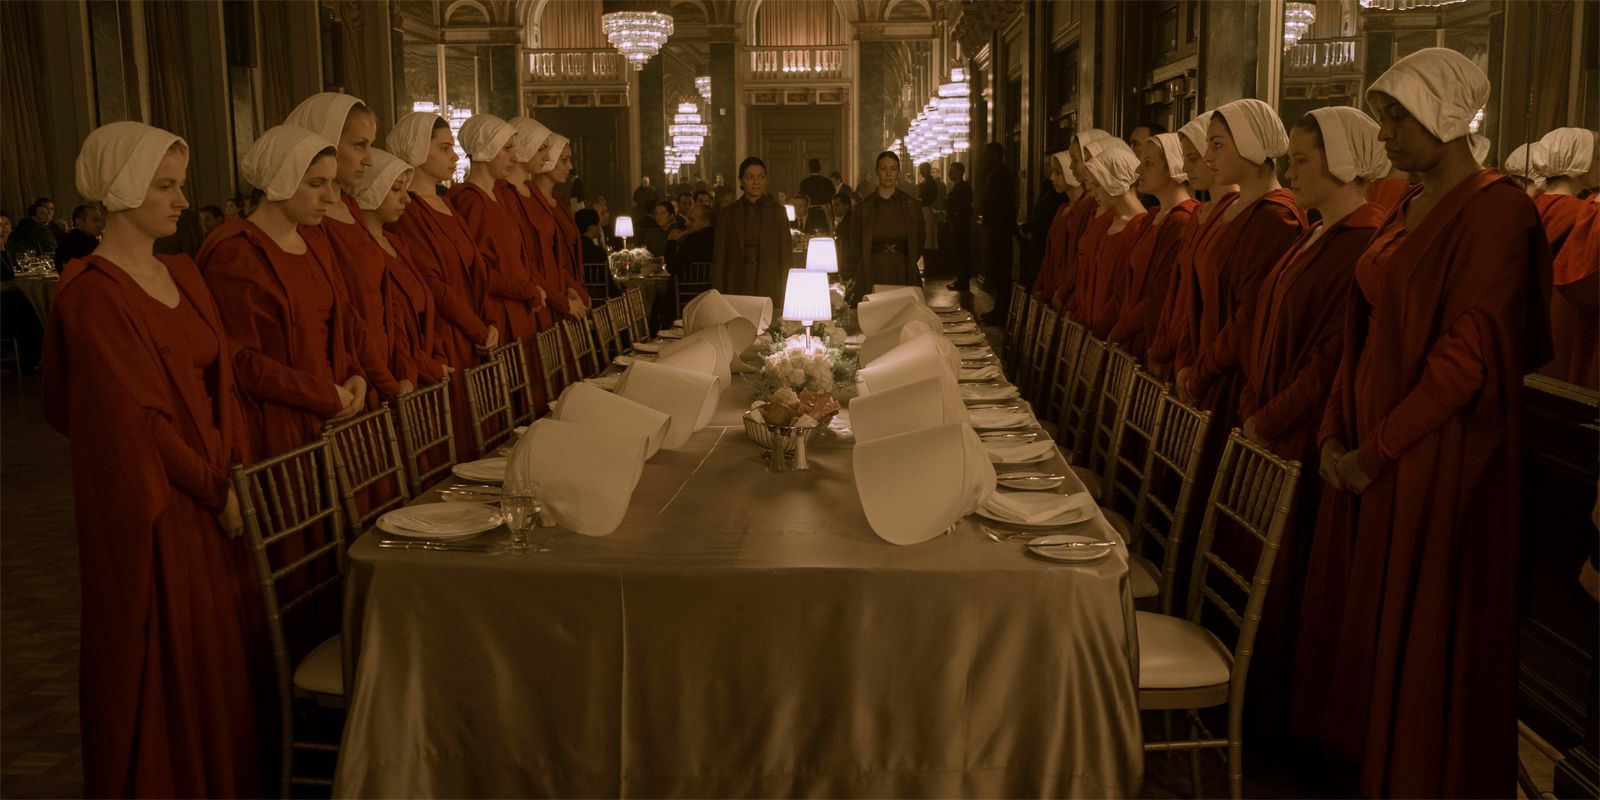 Handmaidens prepare for a state dinner in The Handmaid's Tale